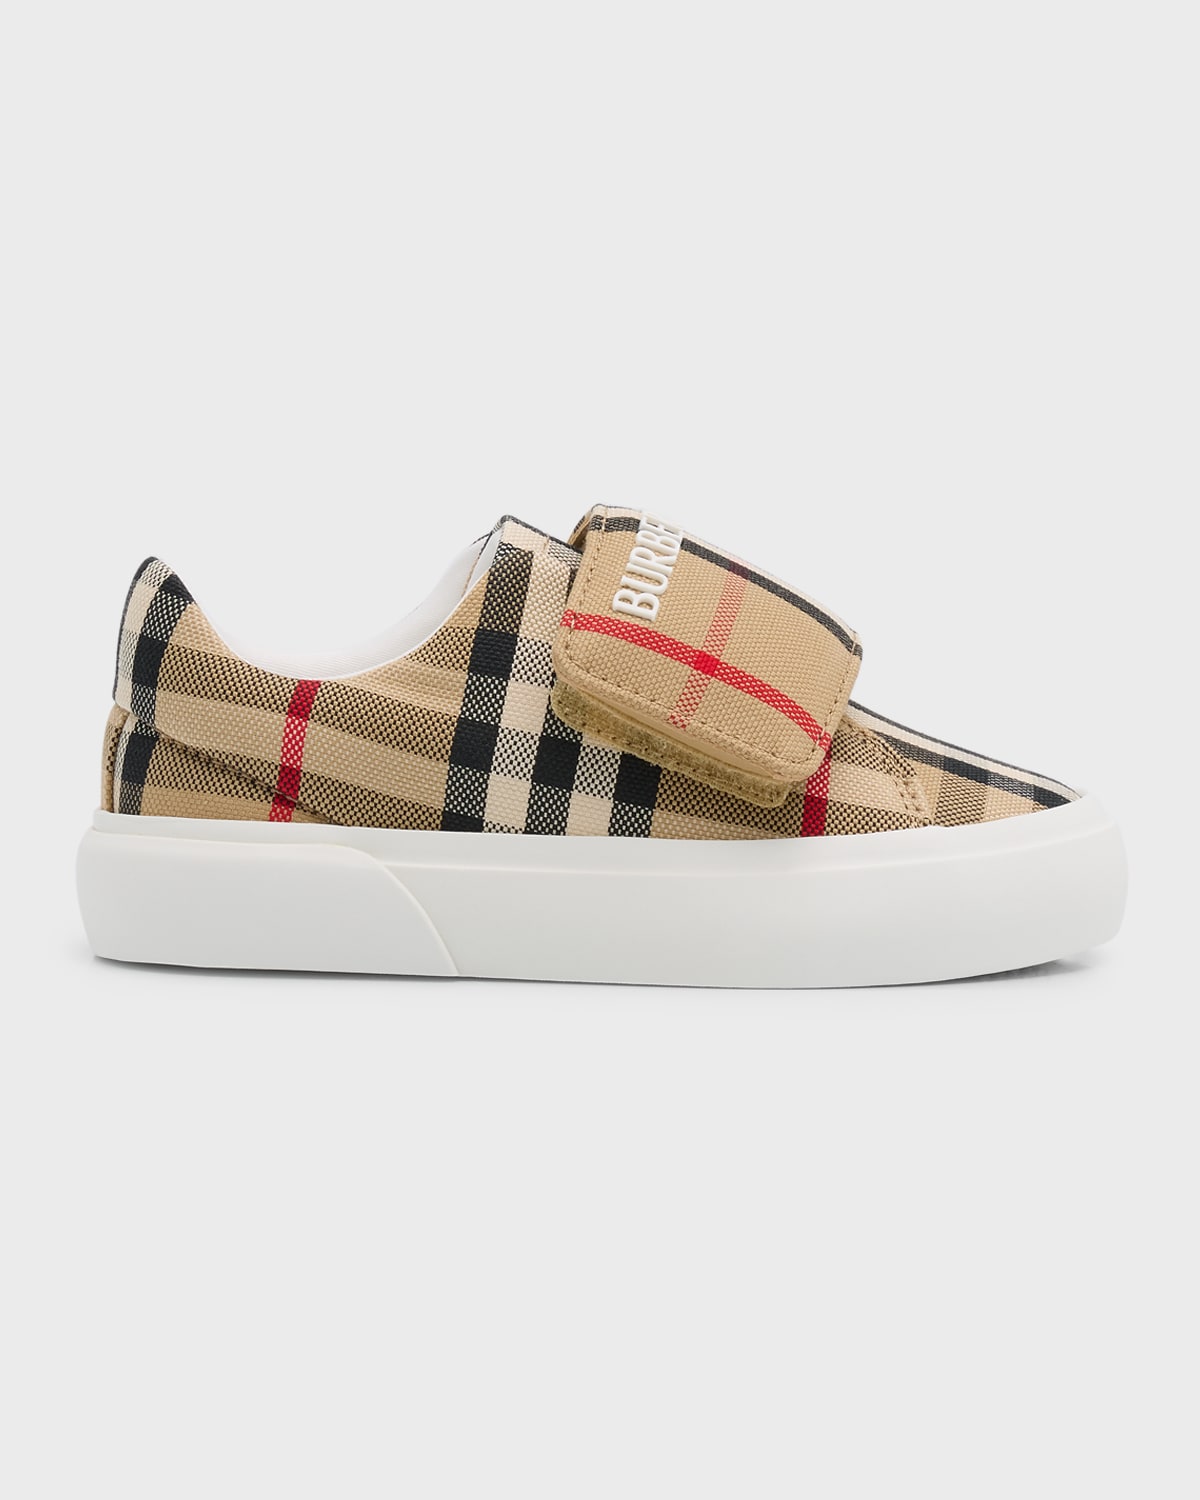 BURBERRY KID'S JAMES CHECK-PRINT SNEAKERS, TODDLERS/KIDS